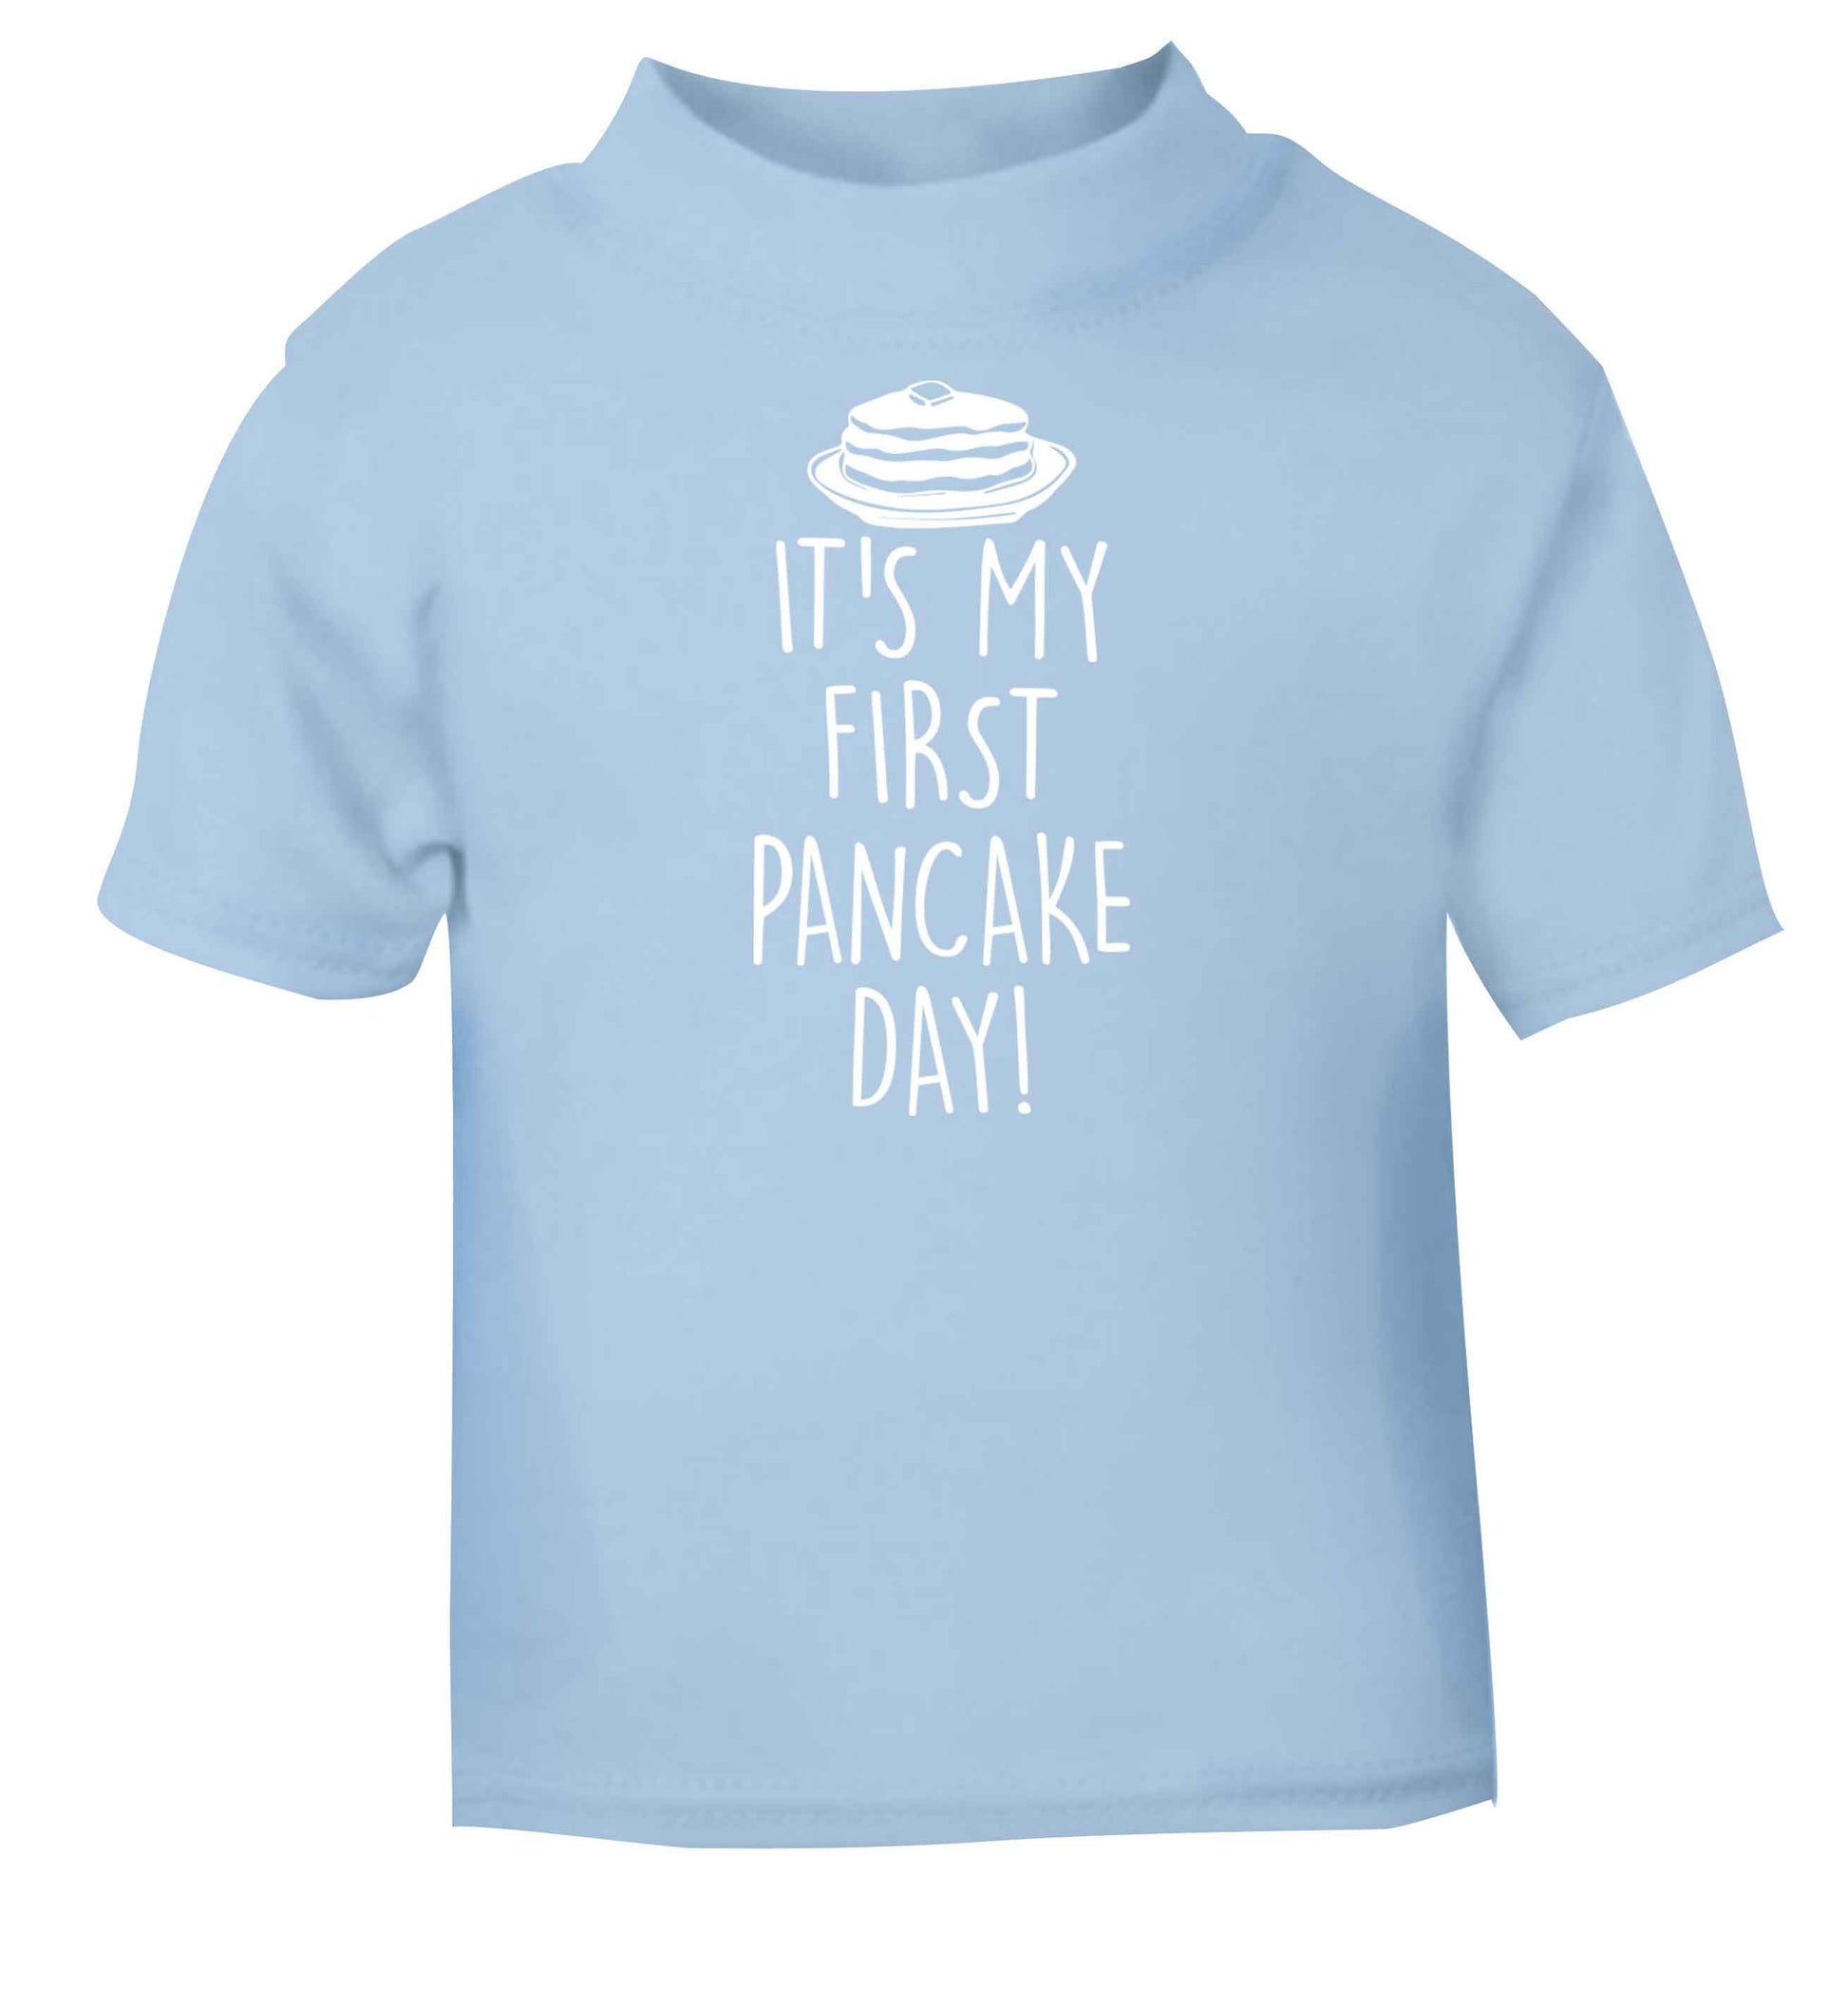 It's my first pancake day light blue baby toddler Tshirt 2 Years